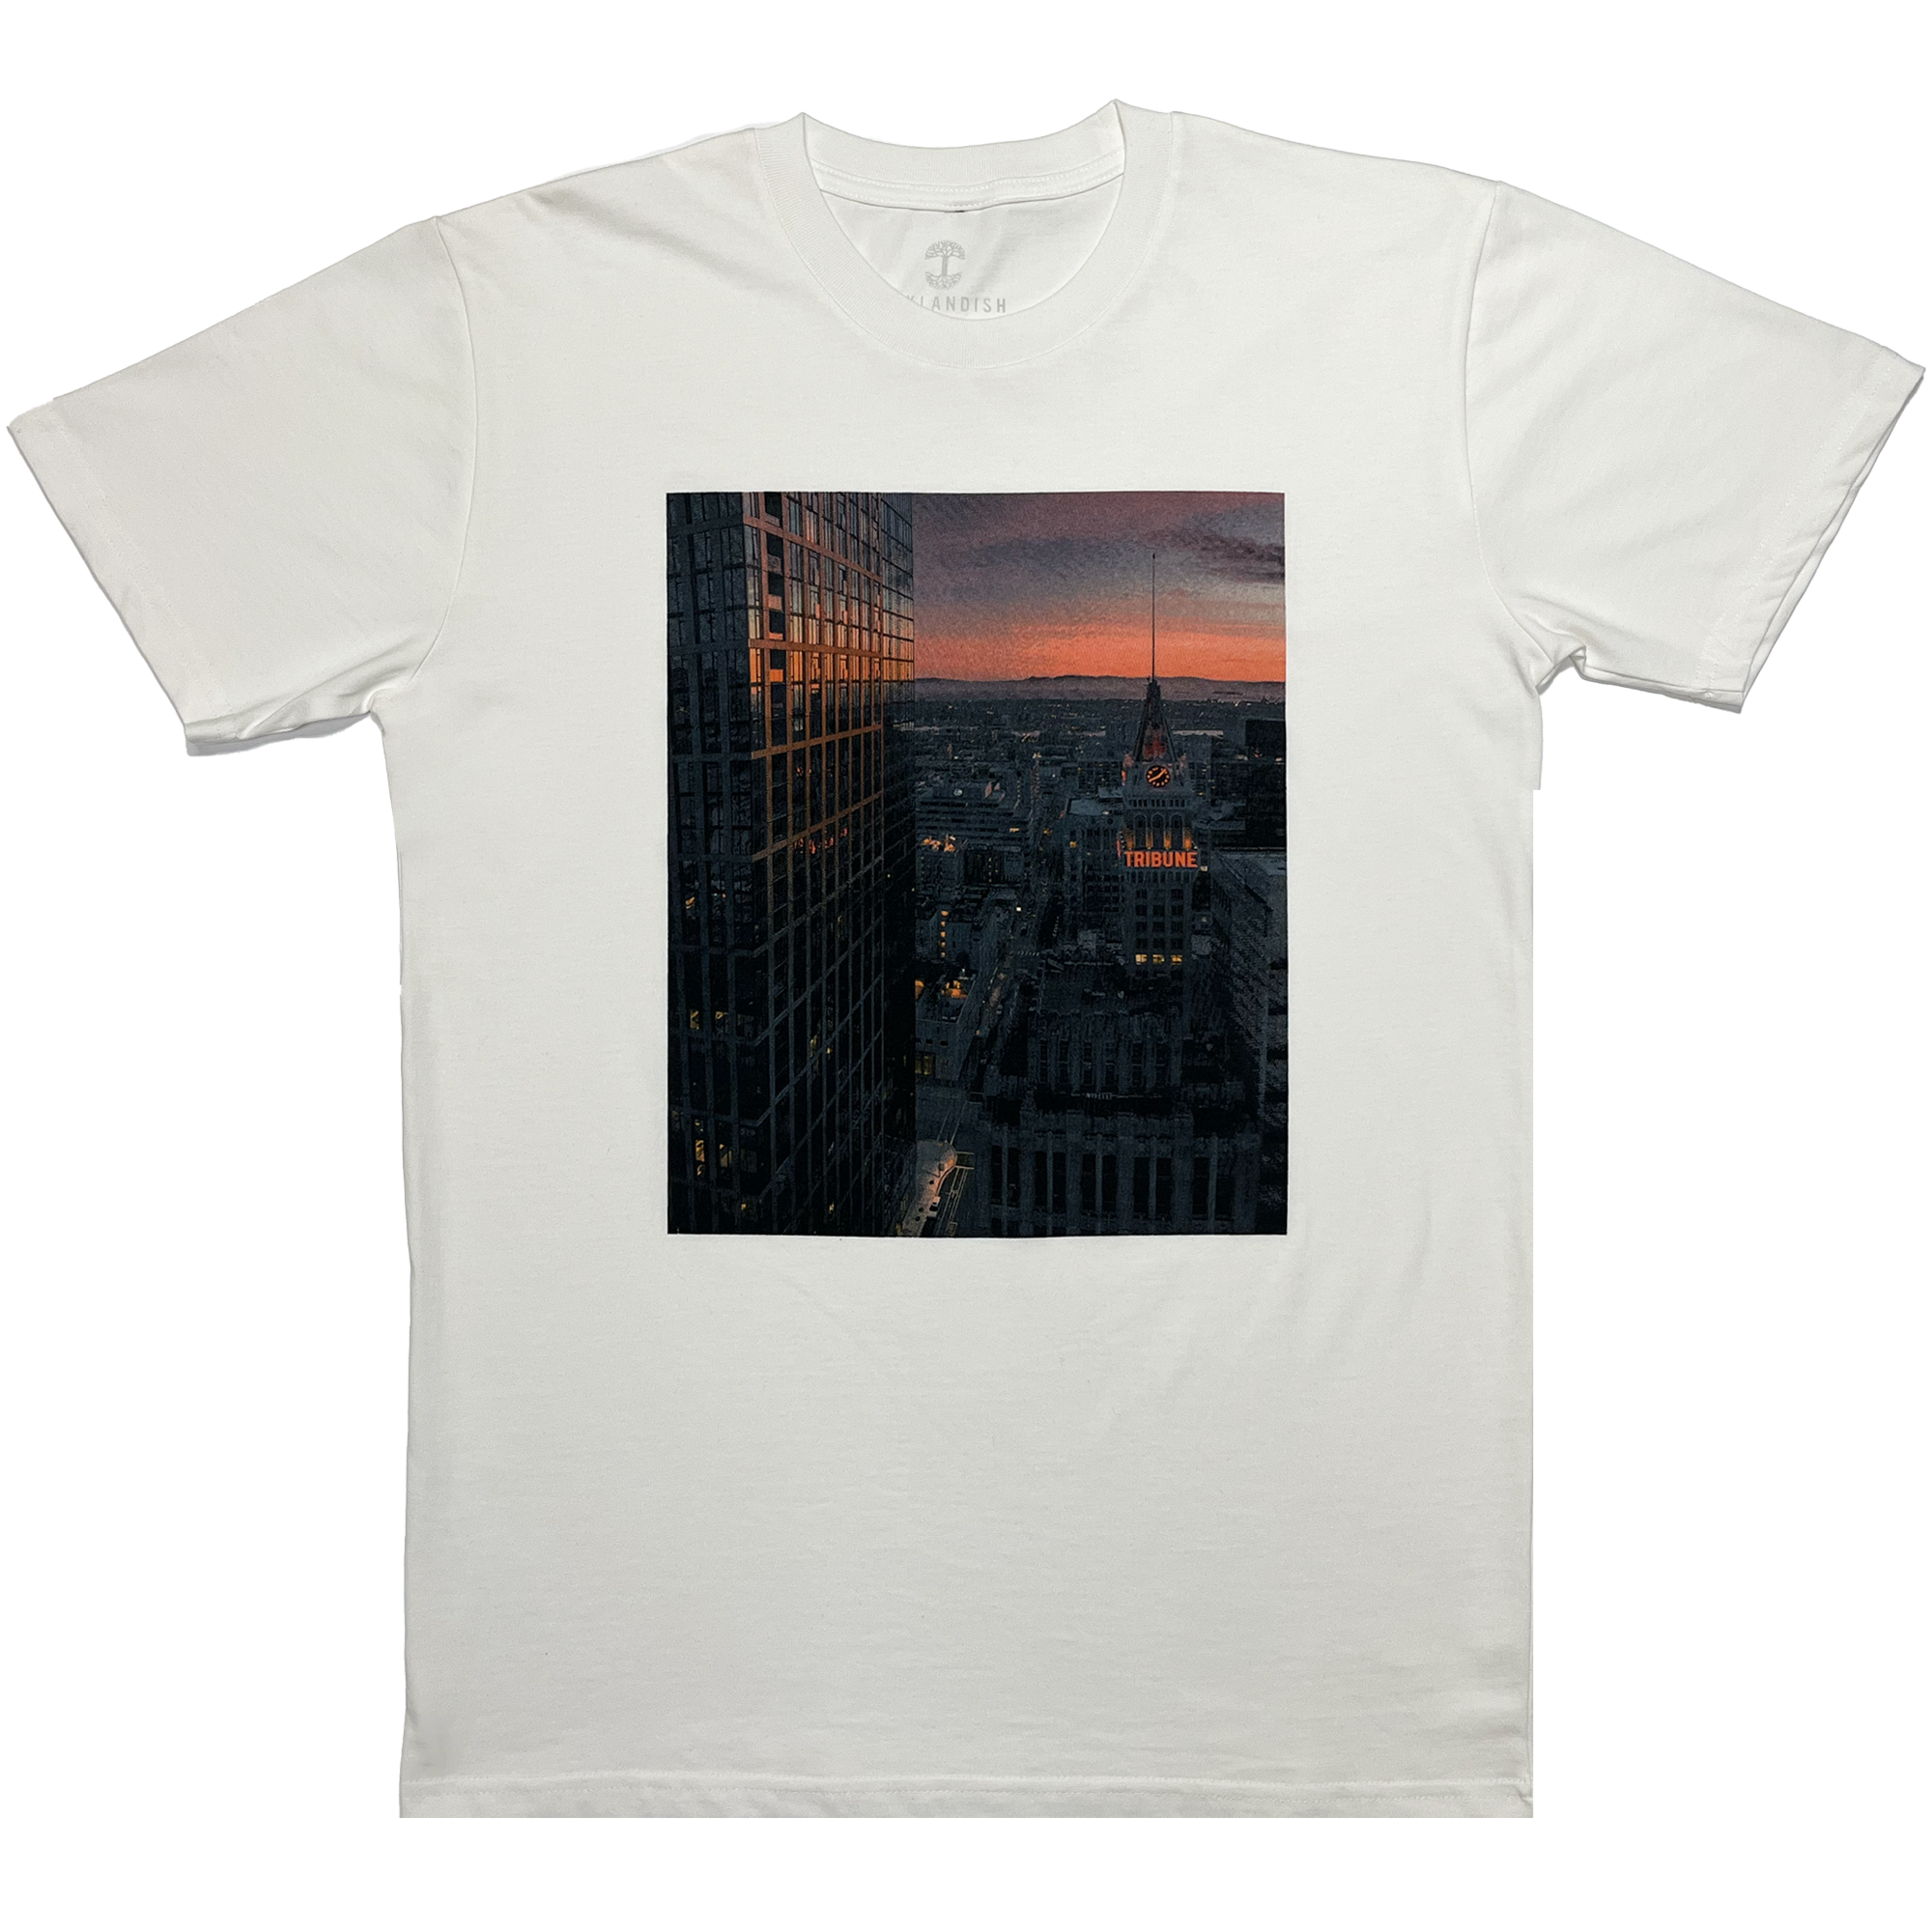 White t-shirt with Vincent James photography image of the Oakland Tribune building and the Downtown Oakland landscape.